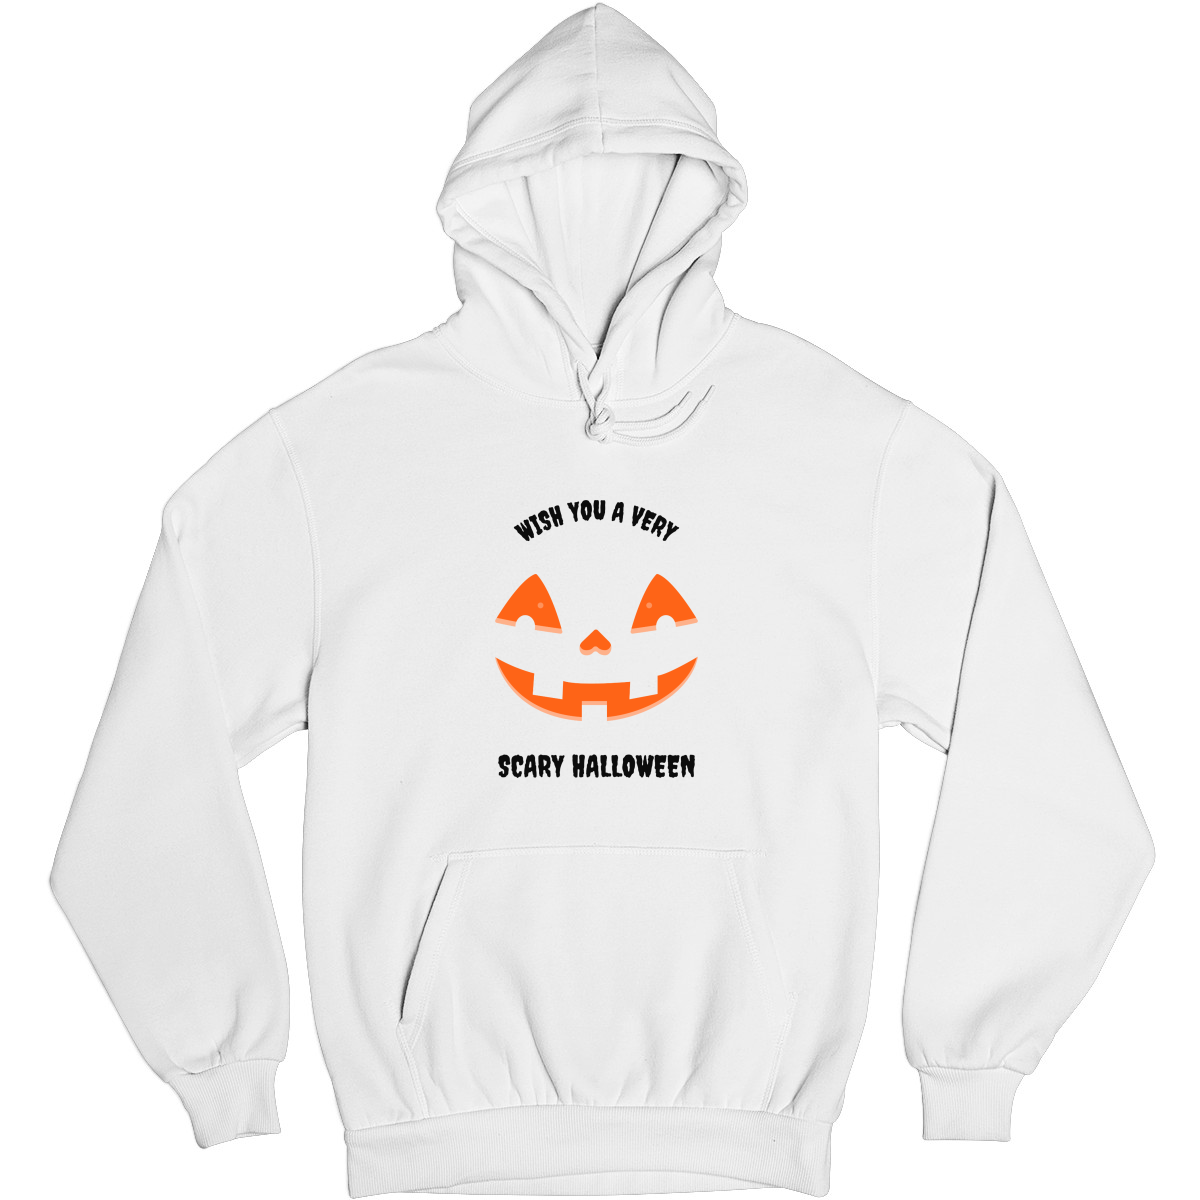 Wish You a Very Scary Halloween Unisex Hoodie | White